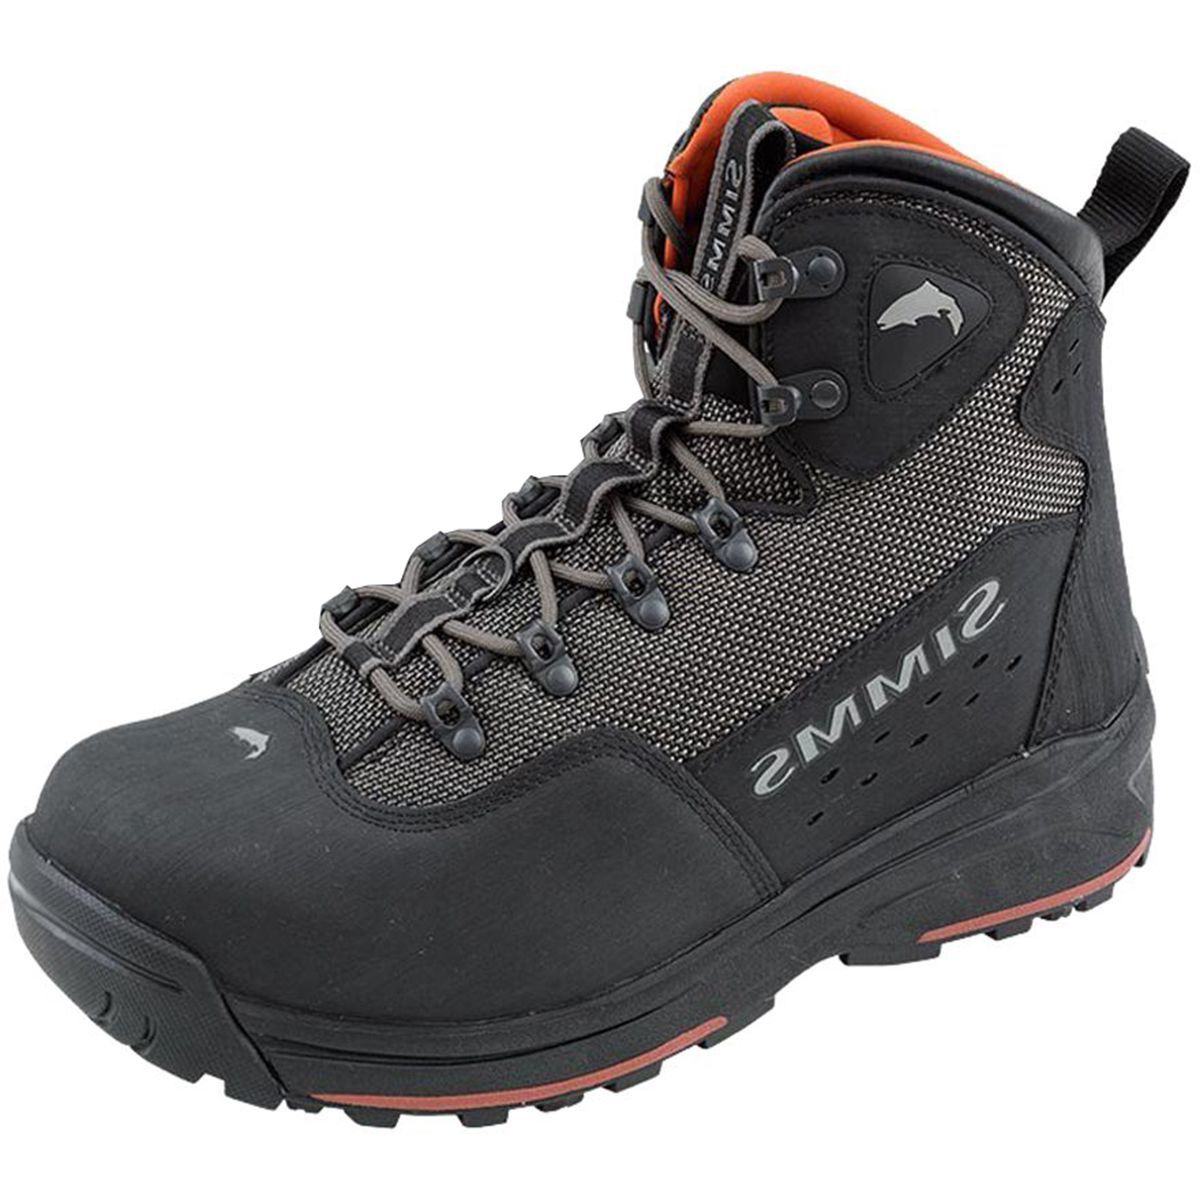 Simms Headwaters Boot - Men's